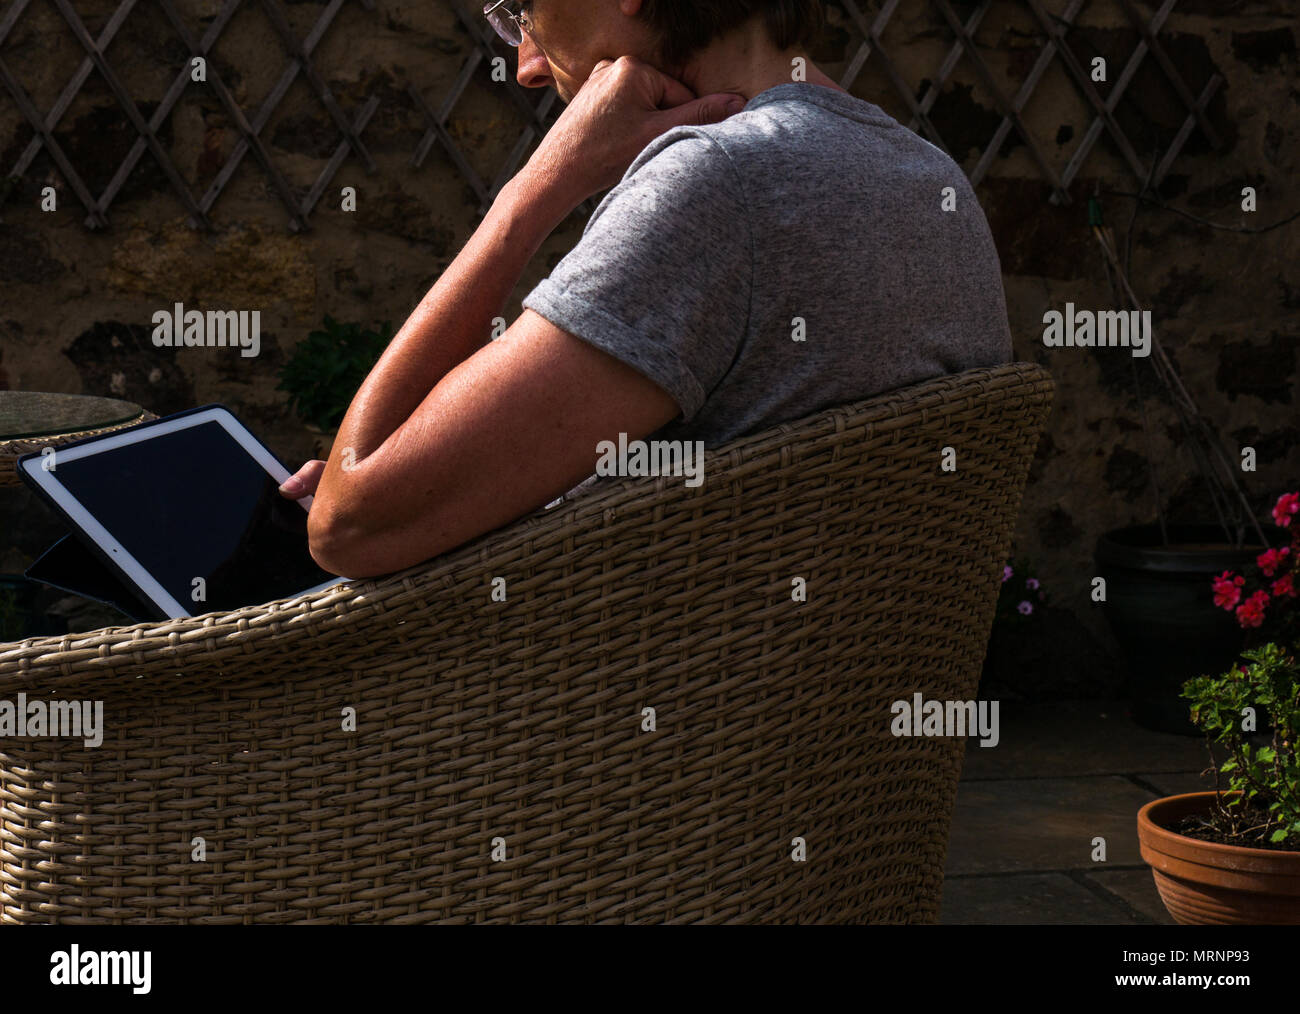 Side view profile of suntanned mature woman with reading glasses sitting in wicker garden chair on patio with flower pots looking at iPad screen Stock Photo